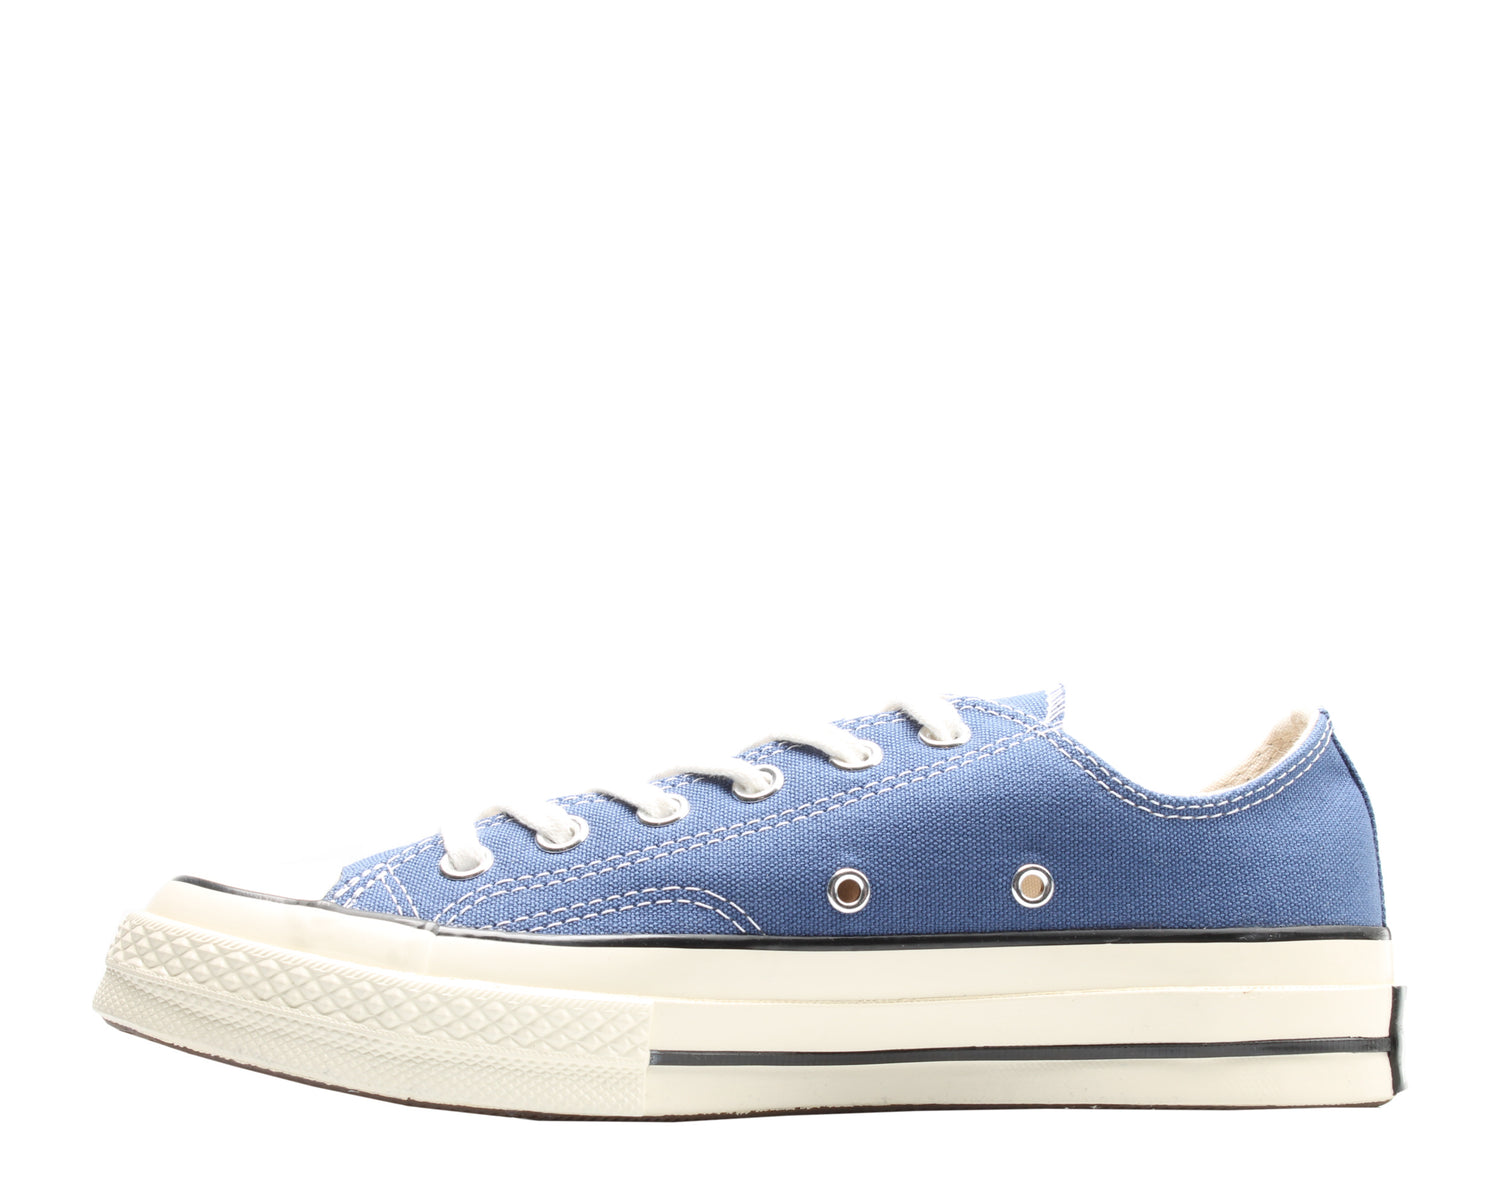 Converse Chuck Taylor All Star 70 Ox Low Top Sneakers